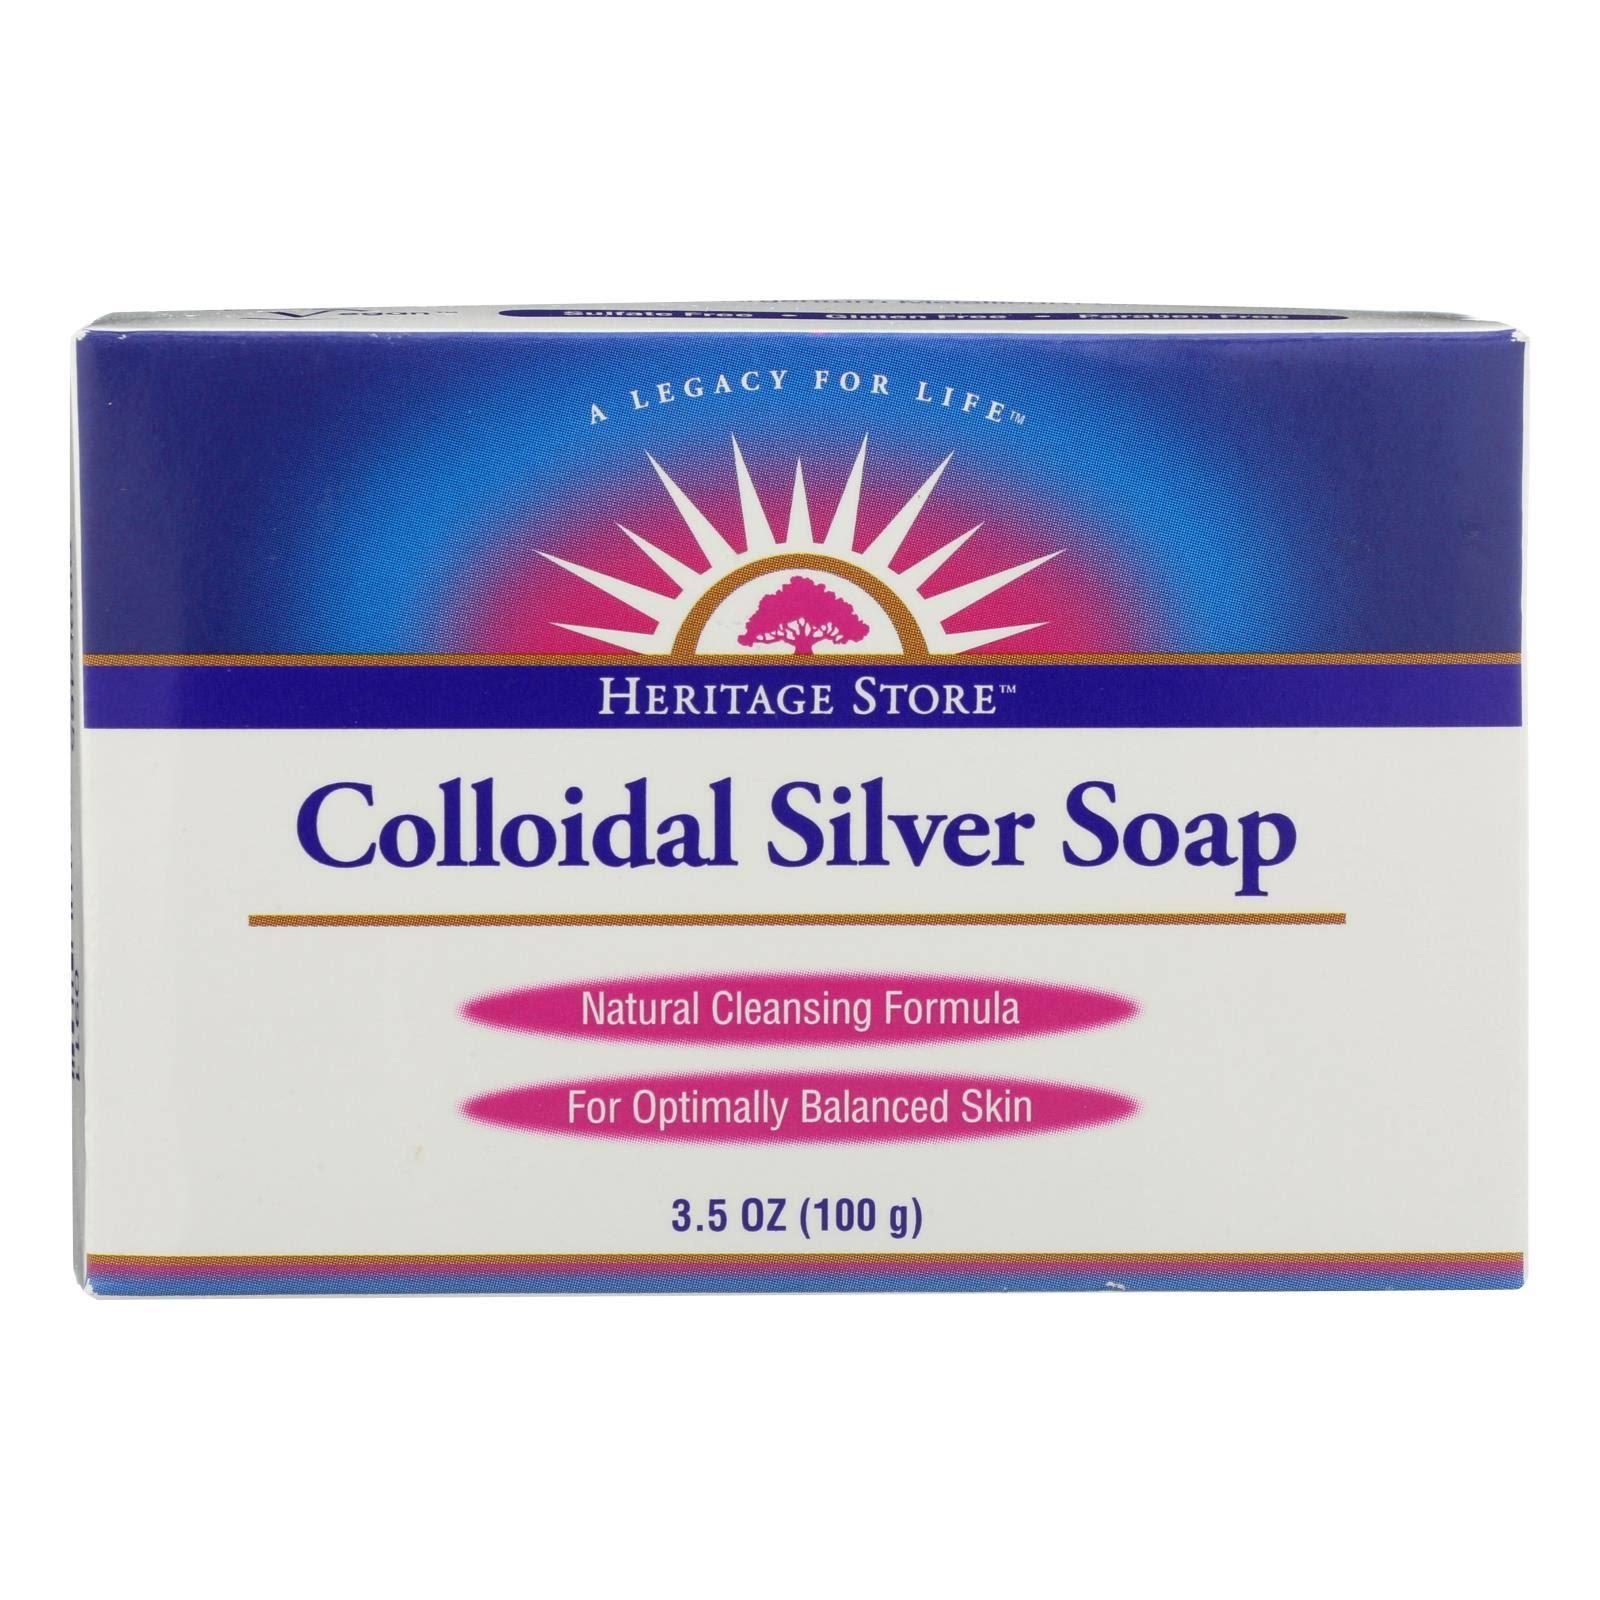 Heritage Store, Colloidal Silver Soap, 3.5 oz (100 g)